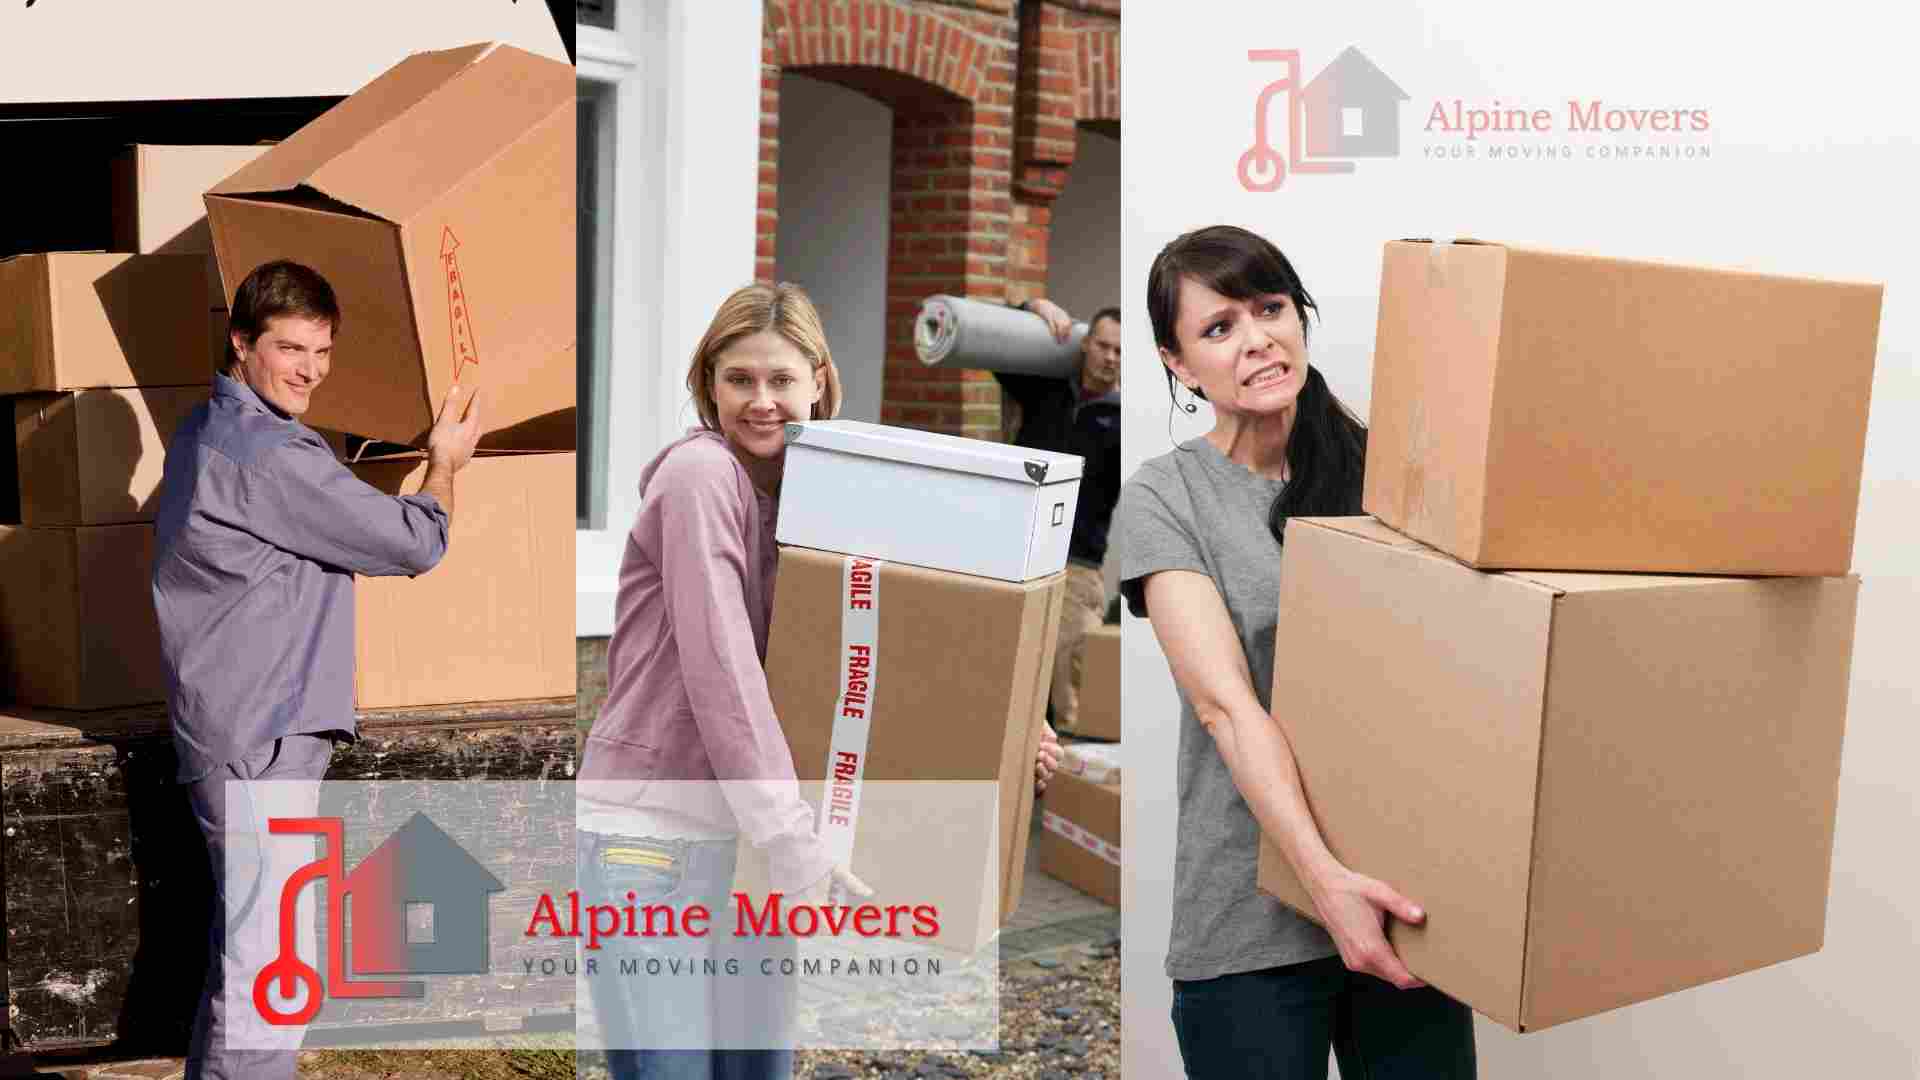 What is Alpine movers offering?